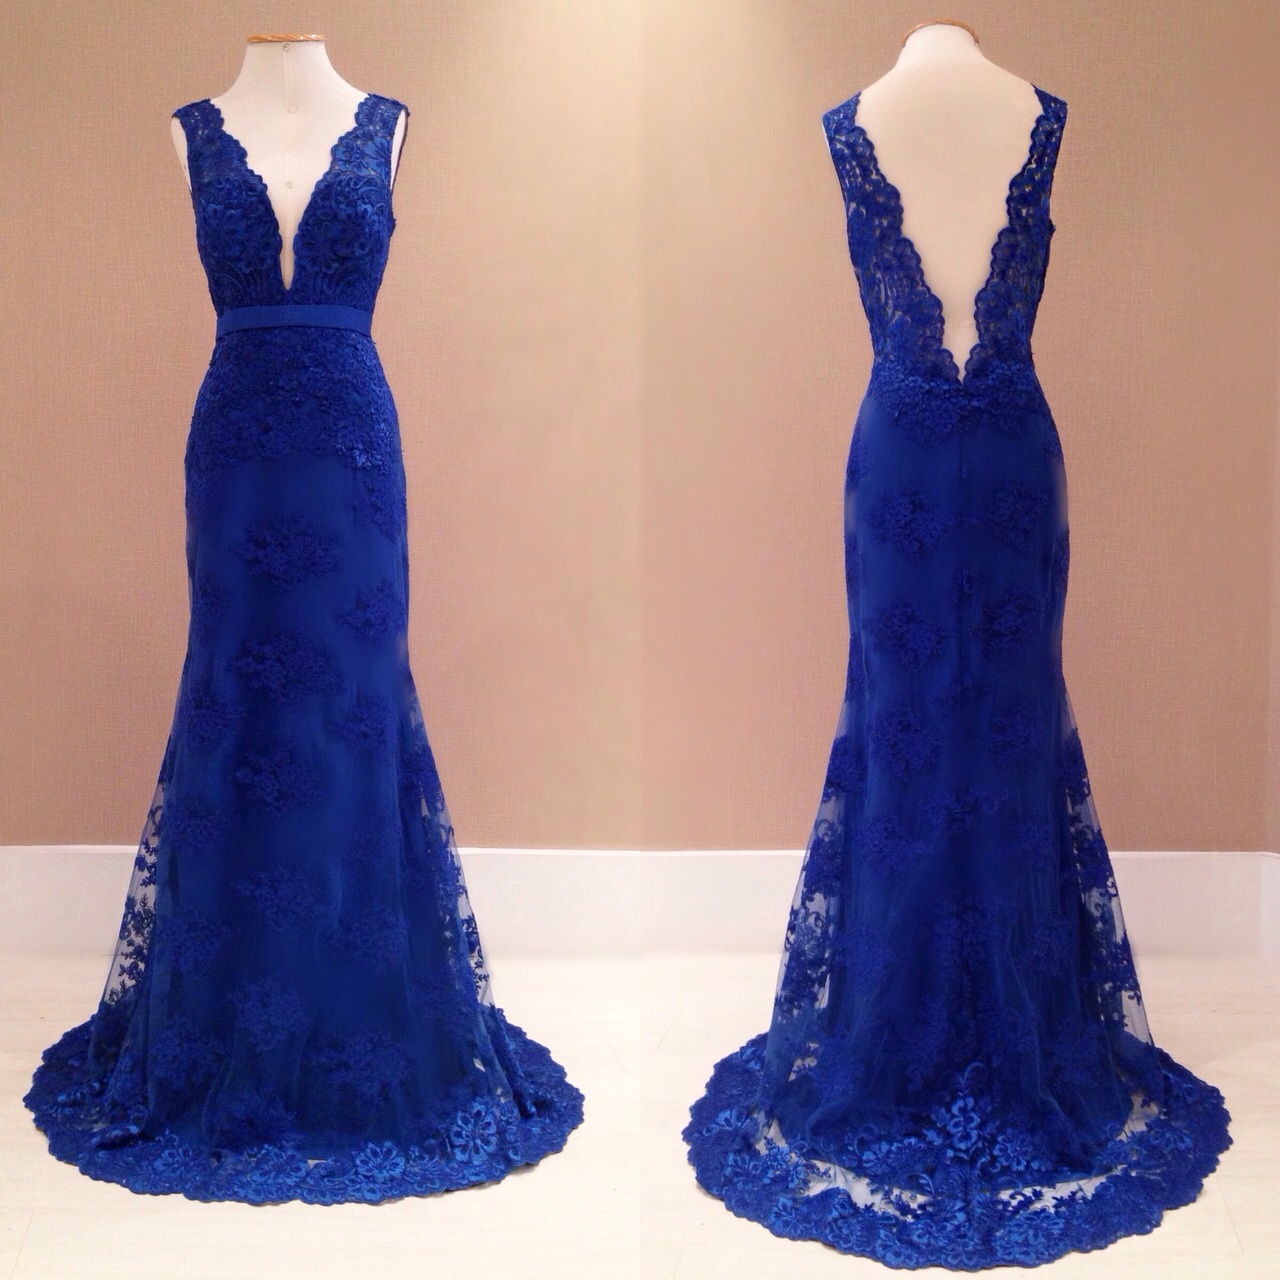 Mermaid Prom Gown,Royal Blue Evening Gowns,Party Dresses,Mermaid